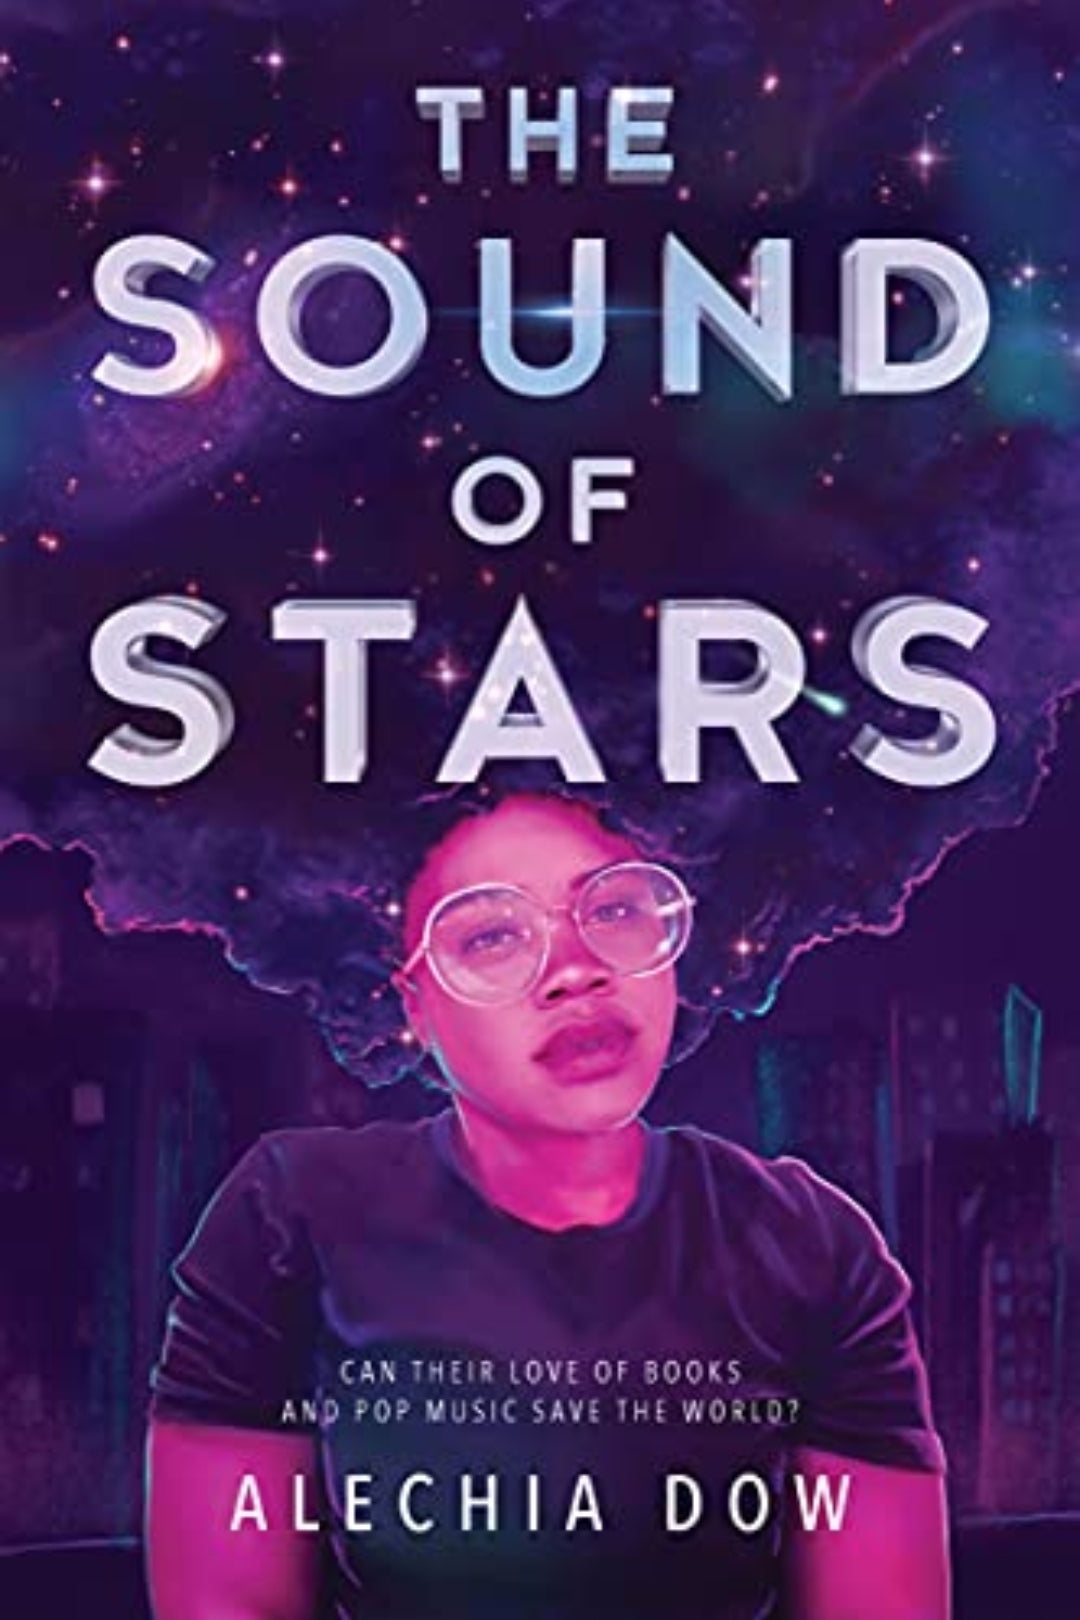 The Sound Of Stars by Alechia Dow